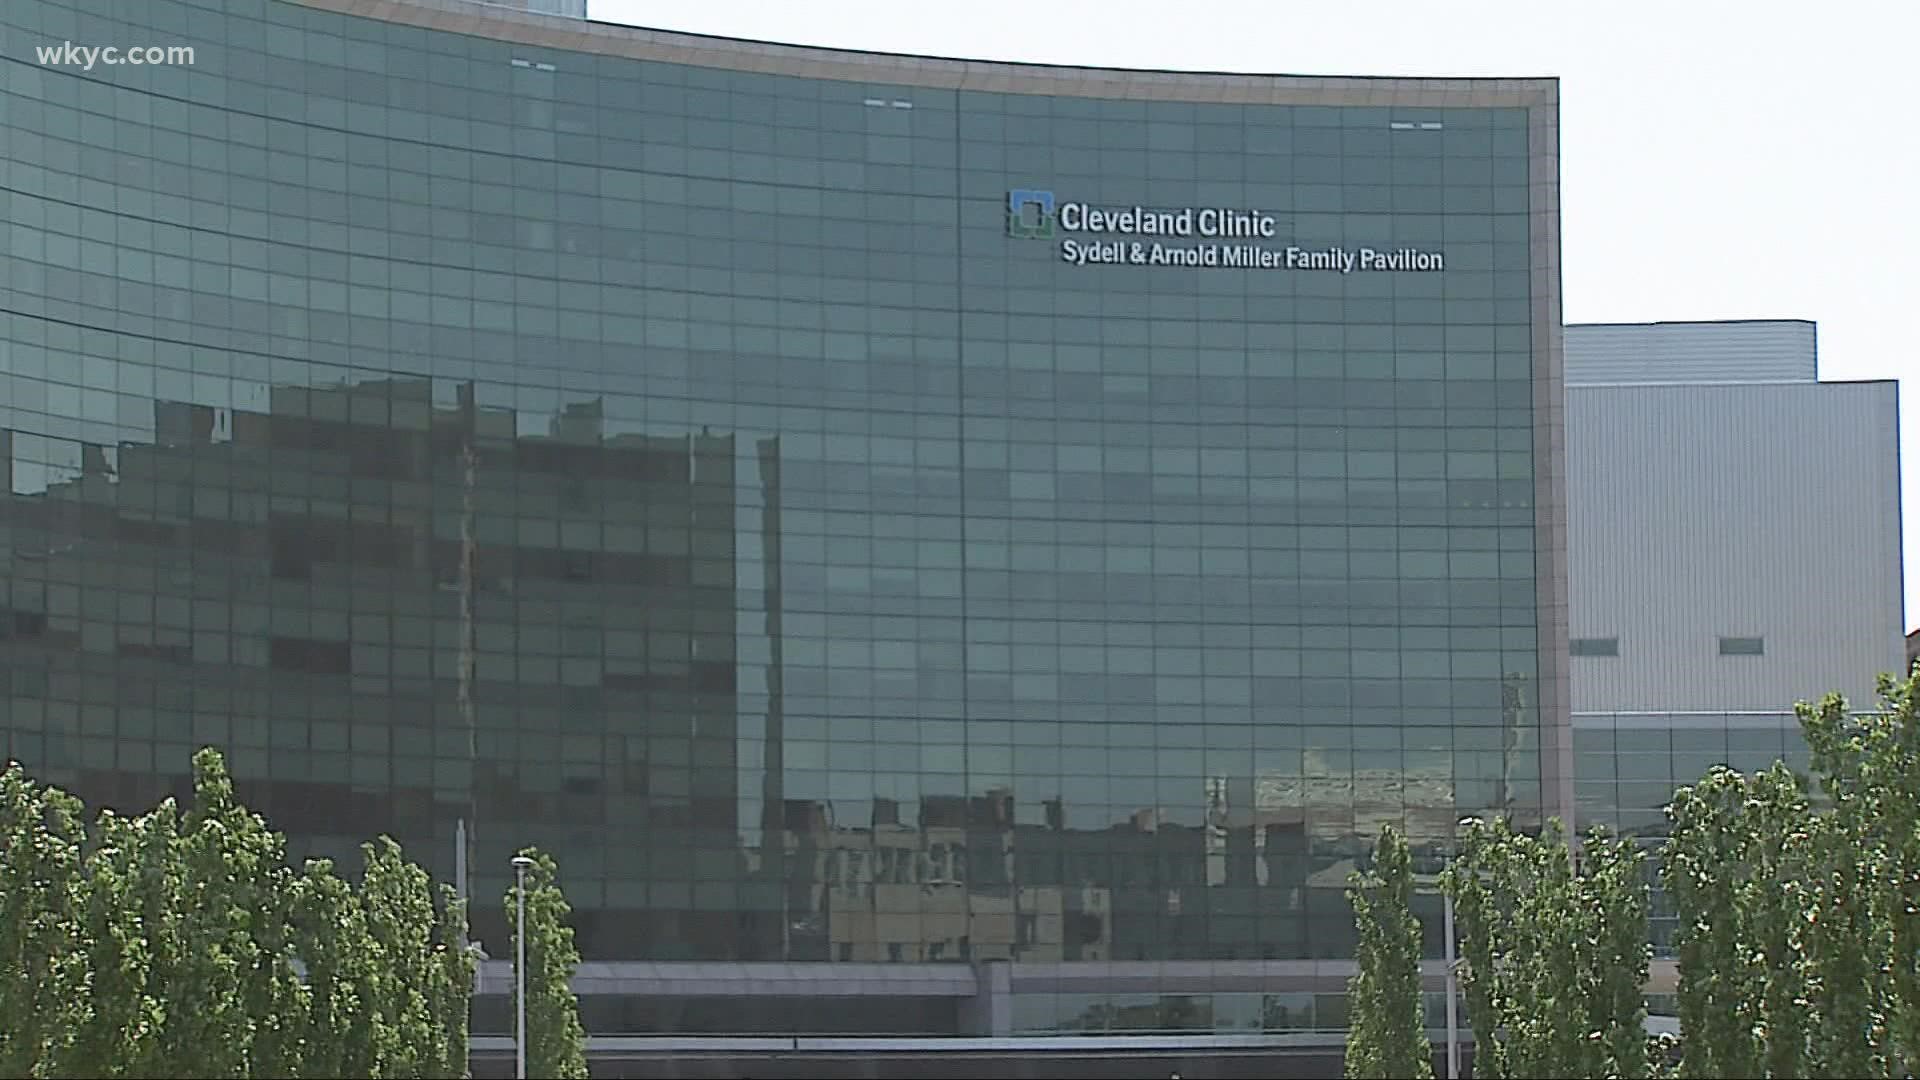 Cleveland Clinic caregivers were required to get their first dose of an mRNA vaccine or their one-dose Johnson & Johnson vaccine by Jan. 27.